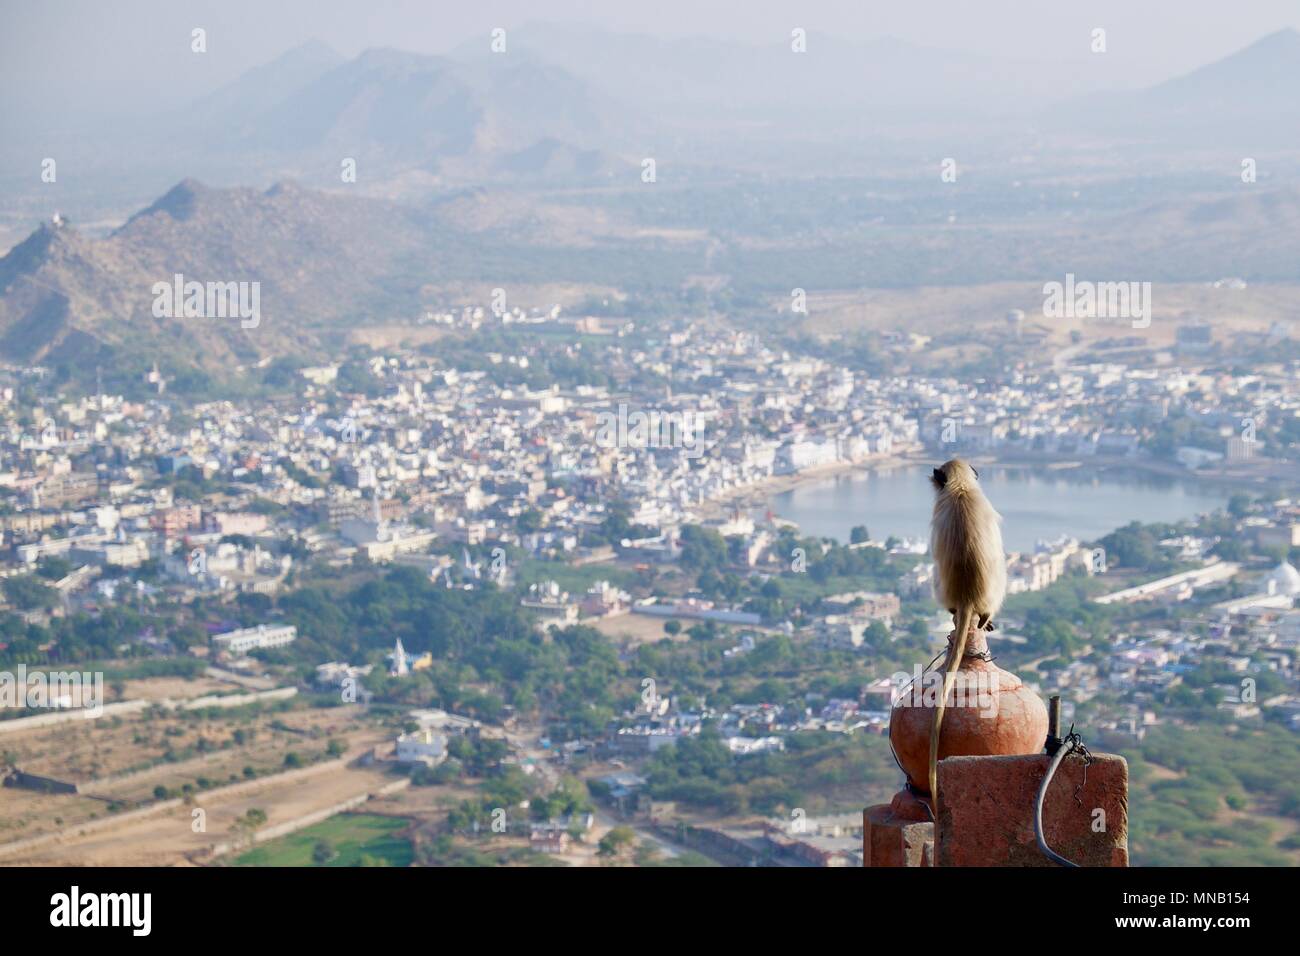 View of Pushkar town and lake from Savitri hill templewith  a langur monkey in foreground Stock Photo